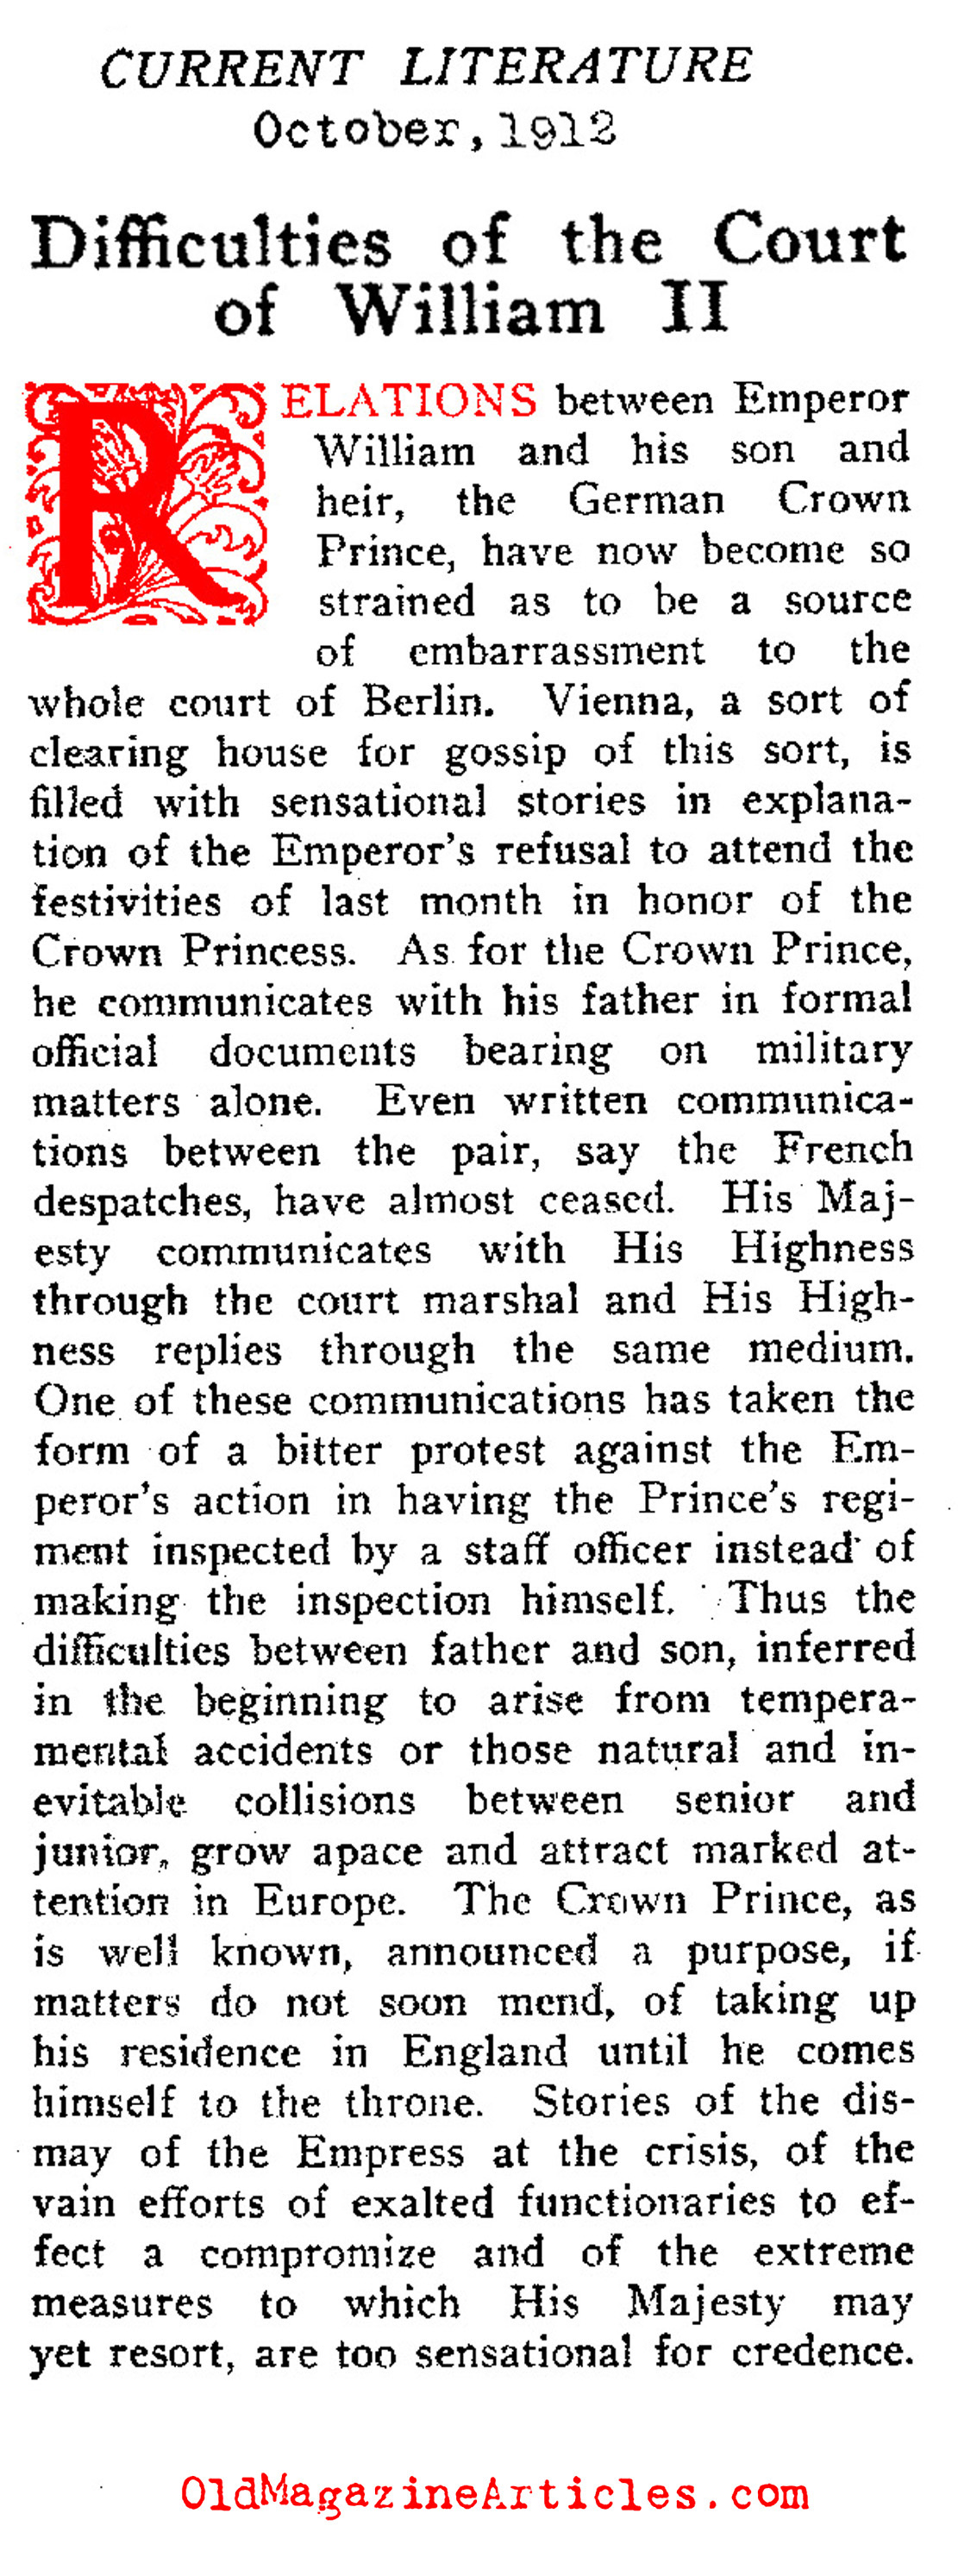 Father and Son Discord: Wilhelm II and the Crown Prince (Current Literature, 1912)